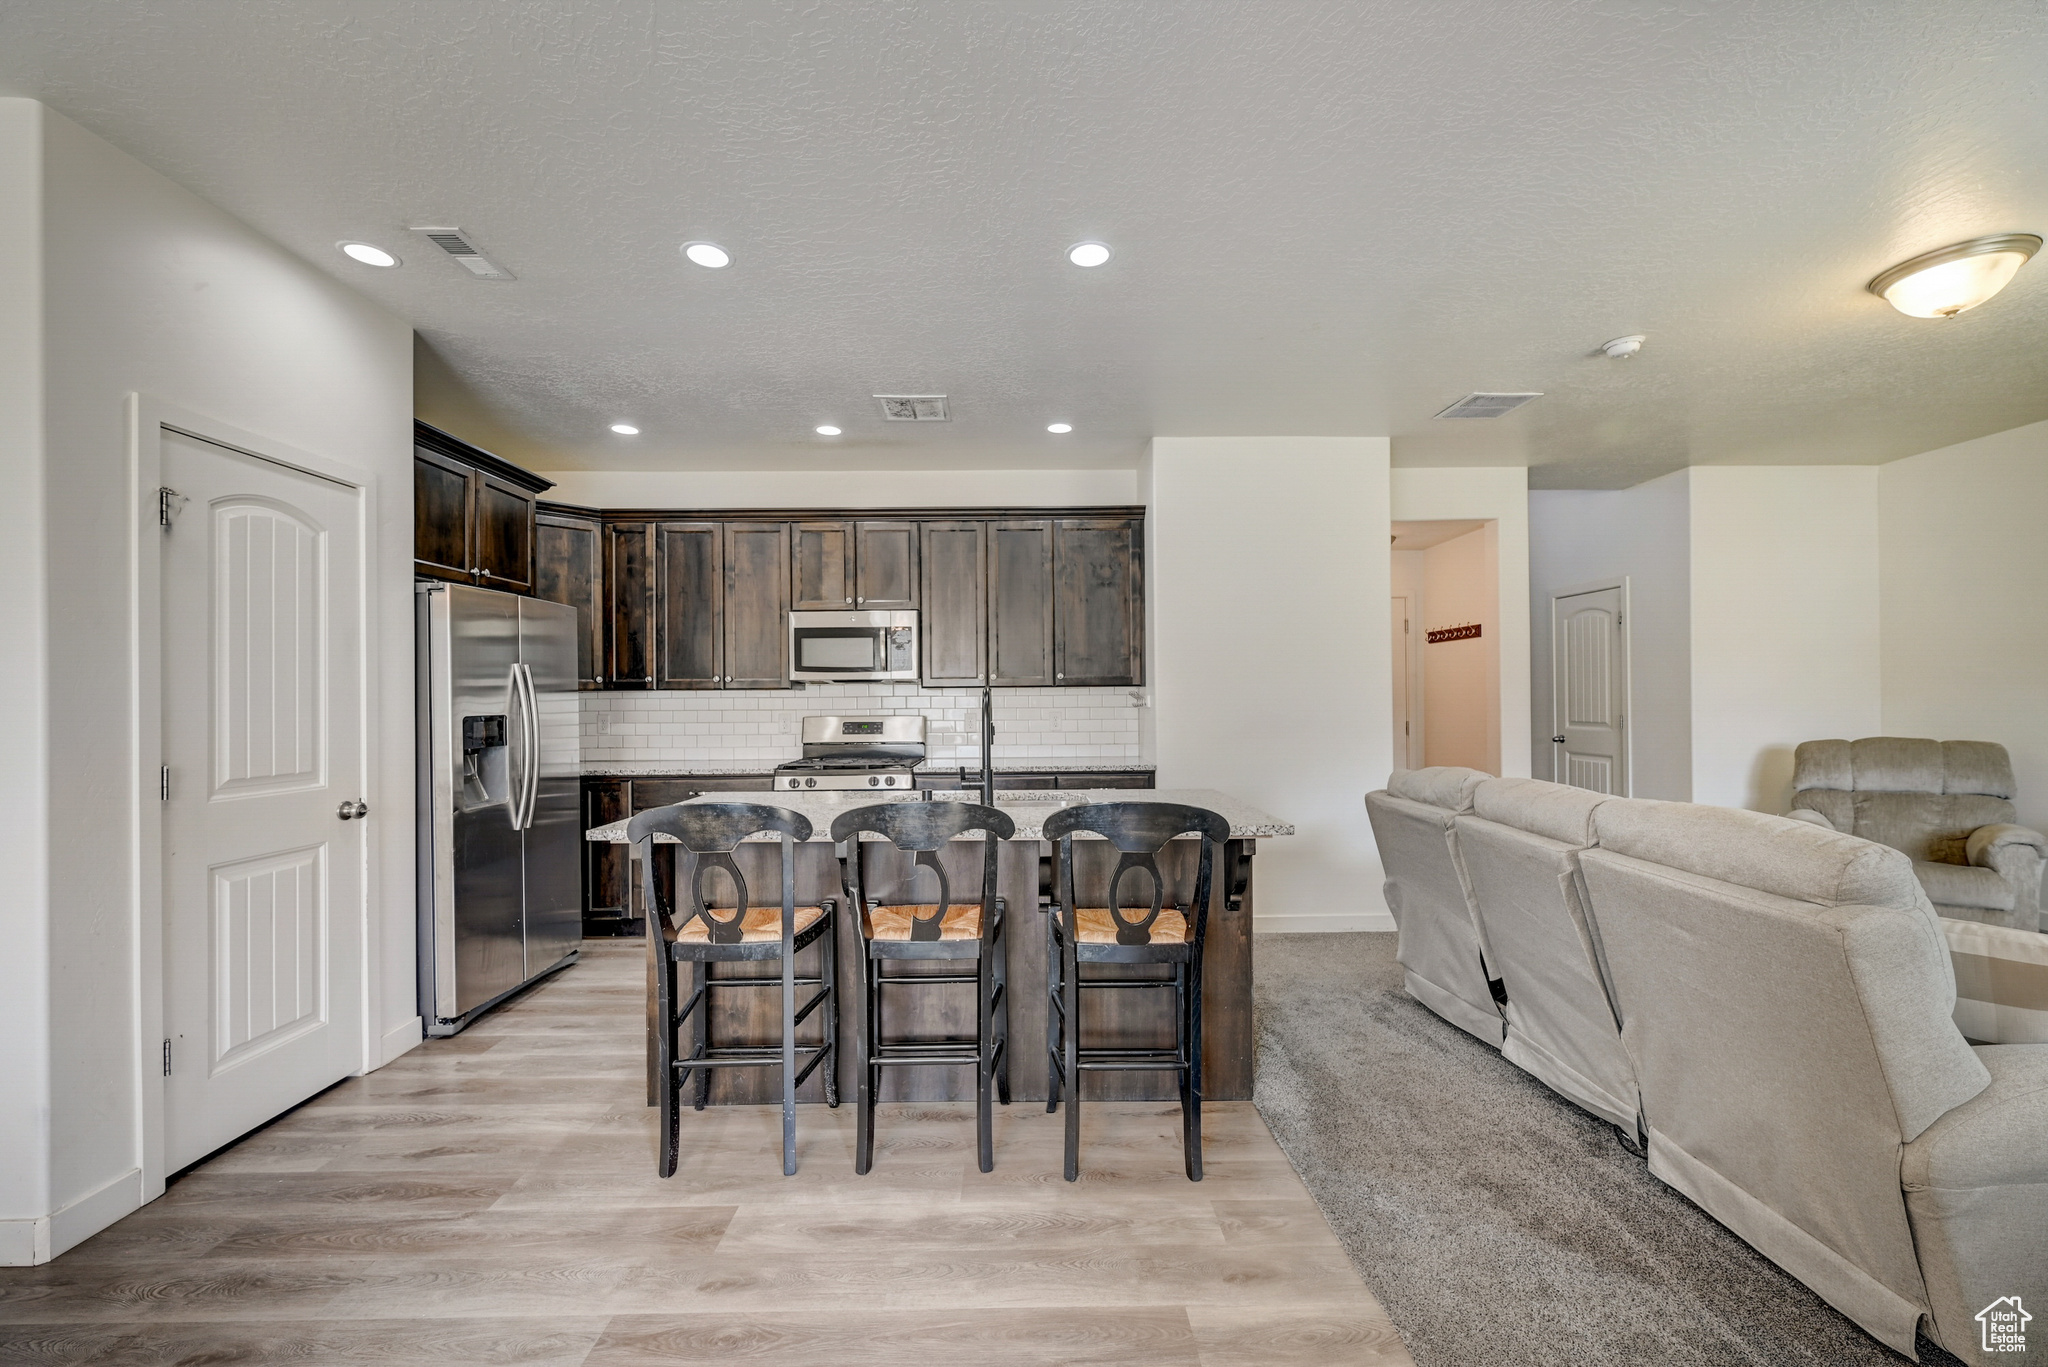 Kitchen with appliances with stainless steel finishes, light wood-type flooring, tasteful backsplash, an island with sink, and a kitchen bar